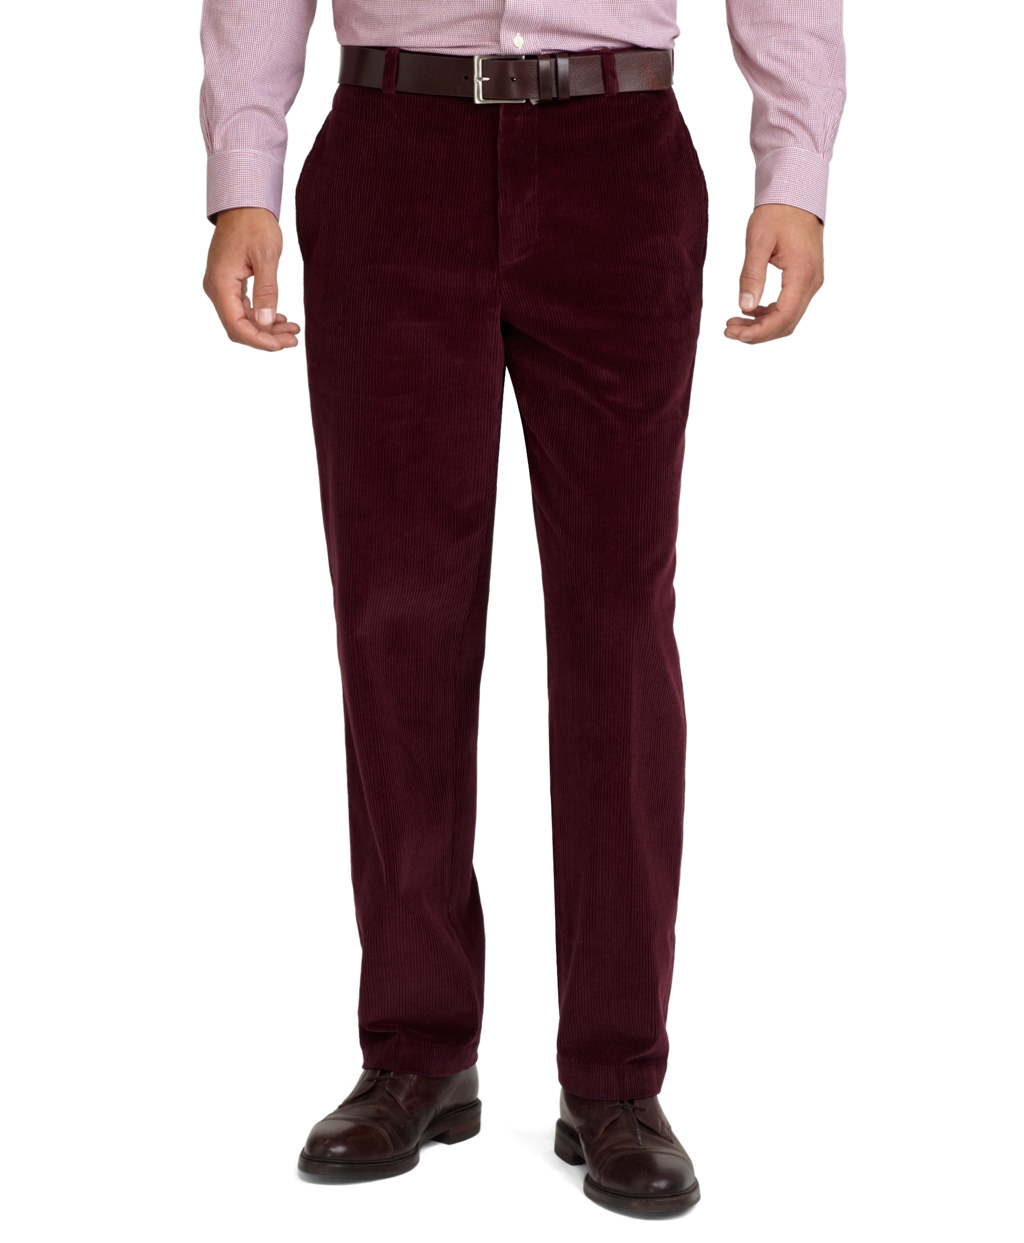 Lyst - Brooks Brothers Hudson 8wale Corduroy Pants in Red for Men